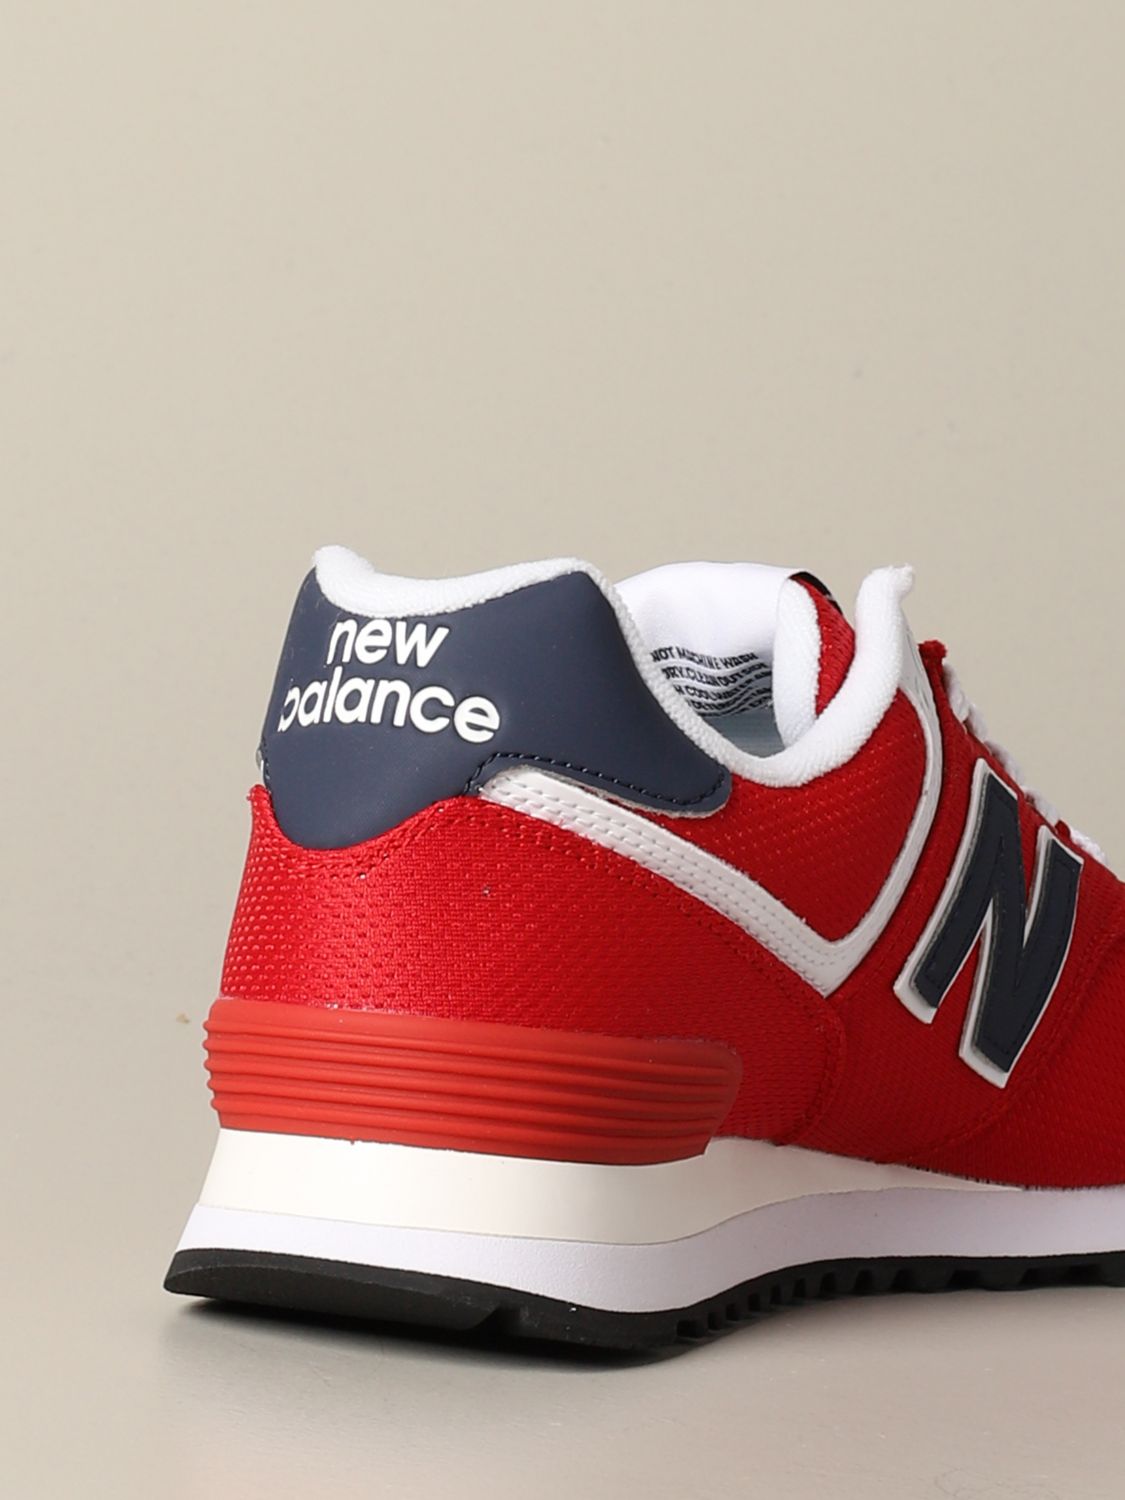 New Balance Outlet: Chaussures homme | Baskets New Balance Homme ...